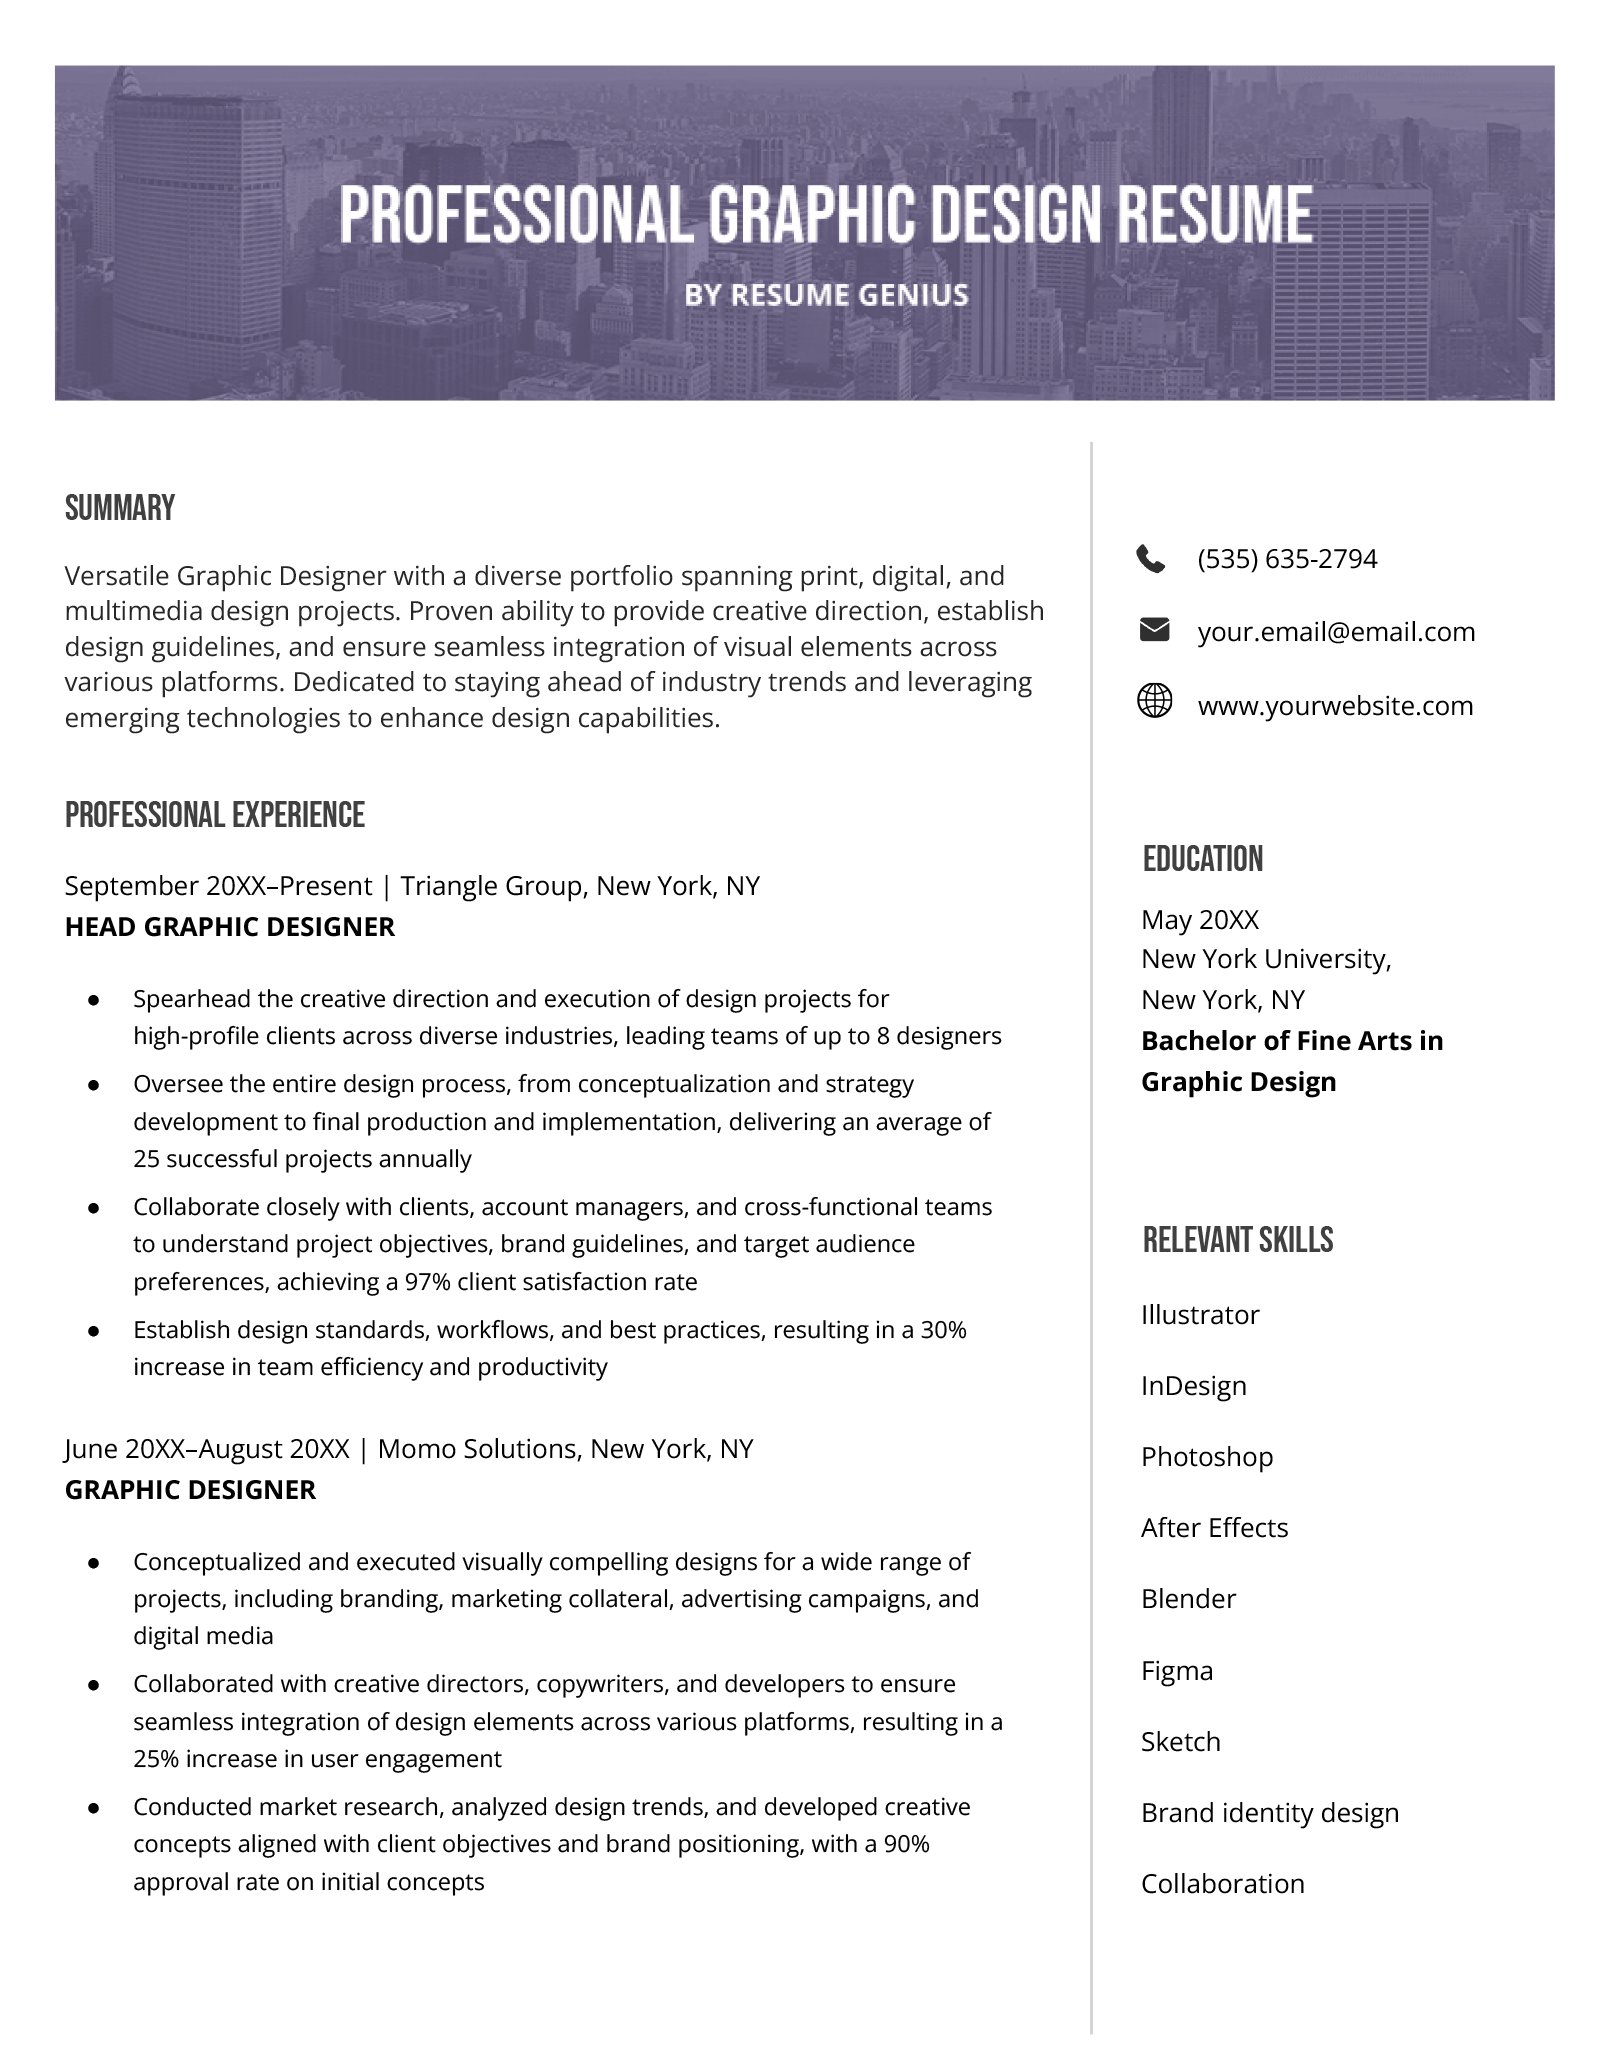 An example of a professional graphic designer resume. 